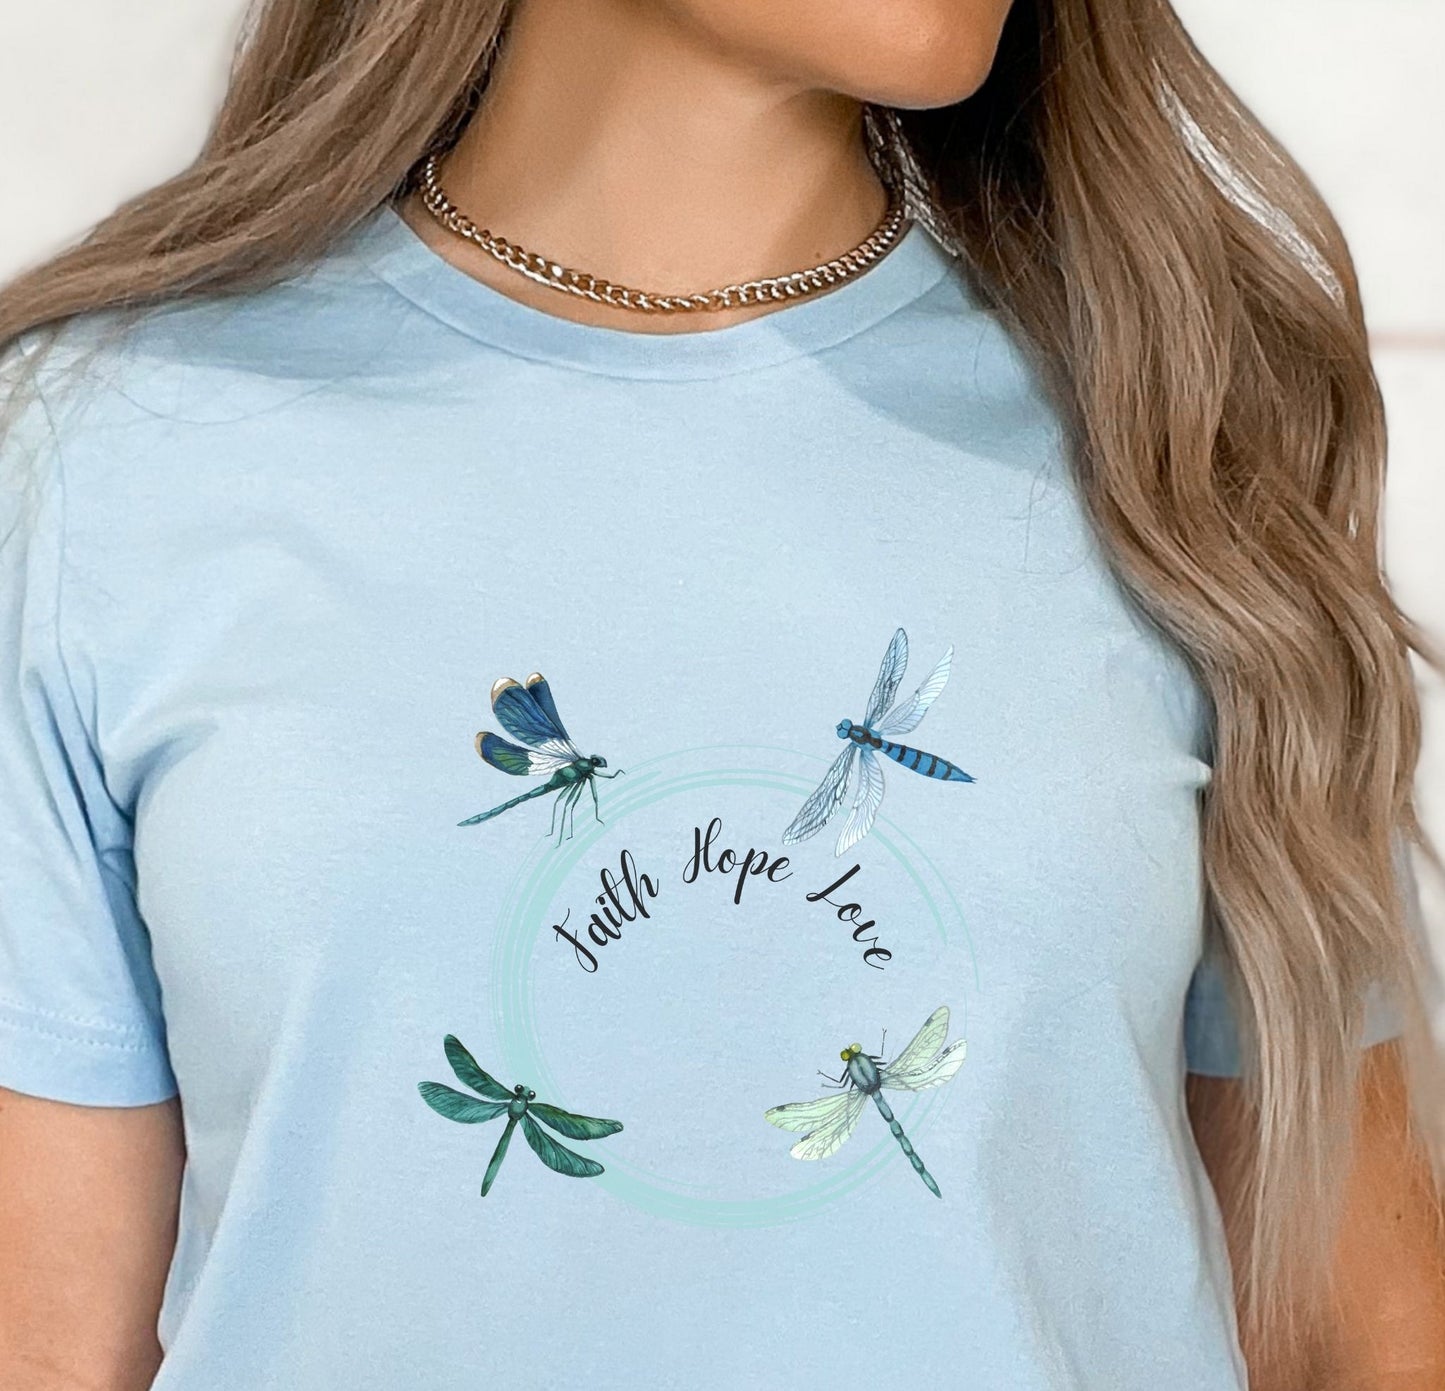 Dragonfly inspirational T shirt Faith, Hope, and Love